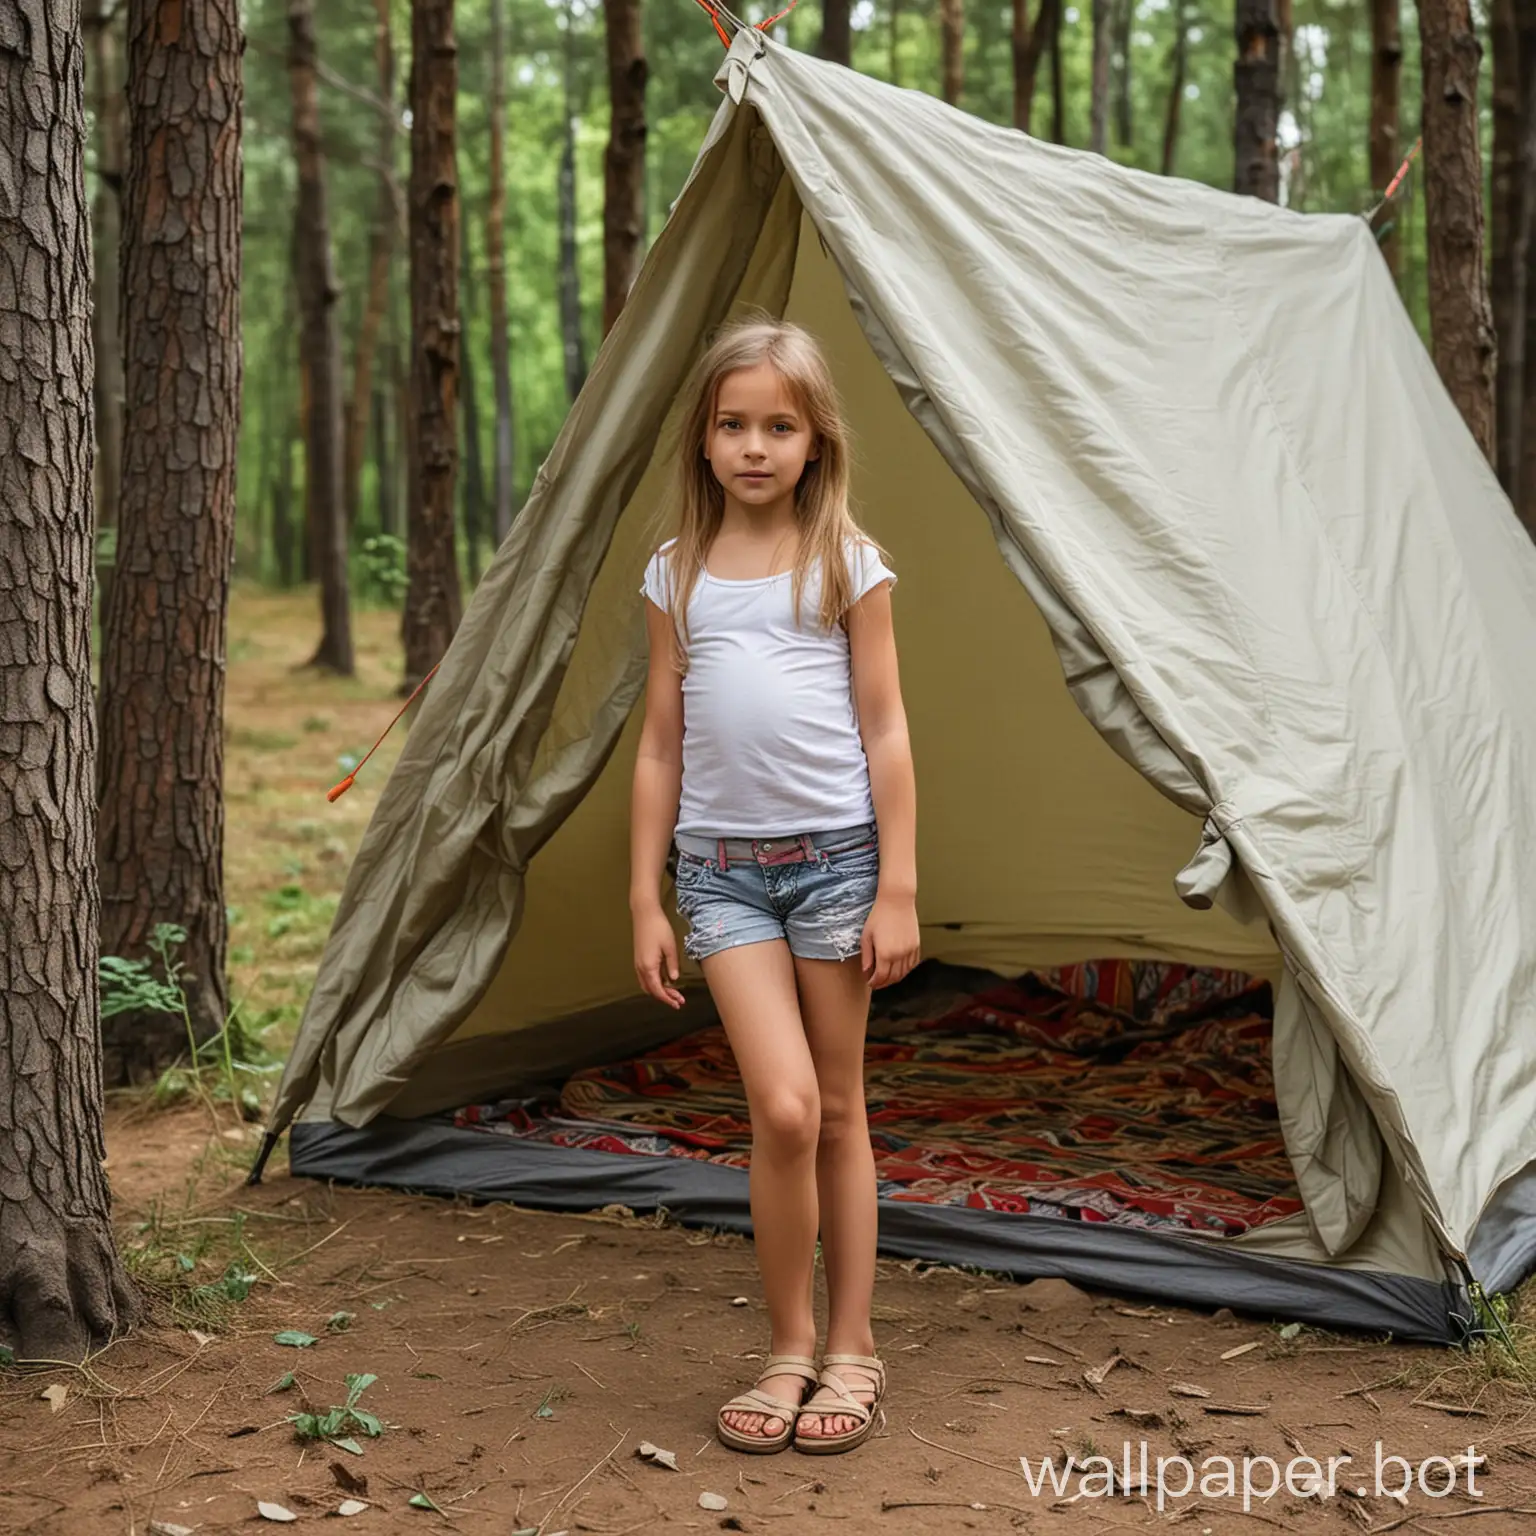 beautiful Russian girl 10-years-old near a tent, forest, people on the background, full length, dynamic poses, hiding from people, front view, dynamics, she is wearing only sandals